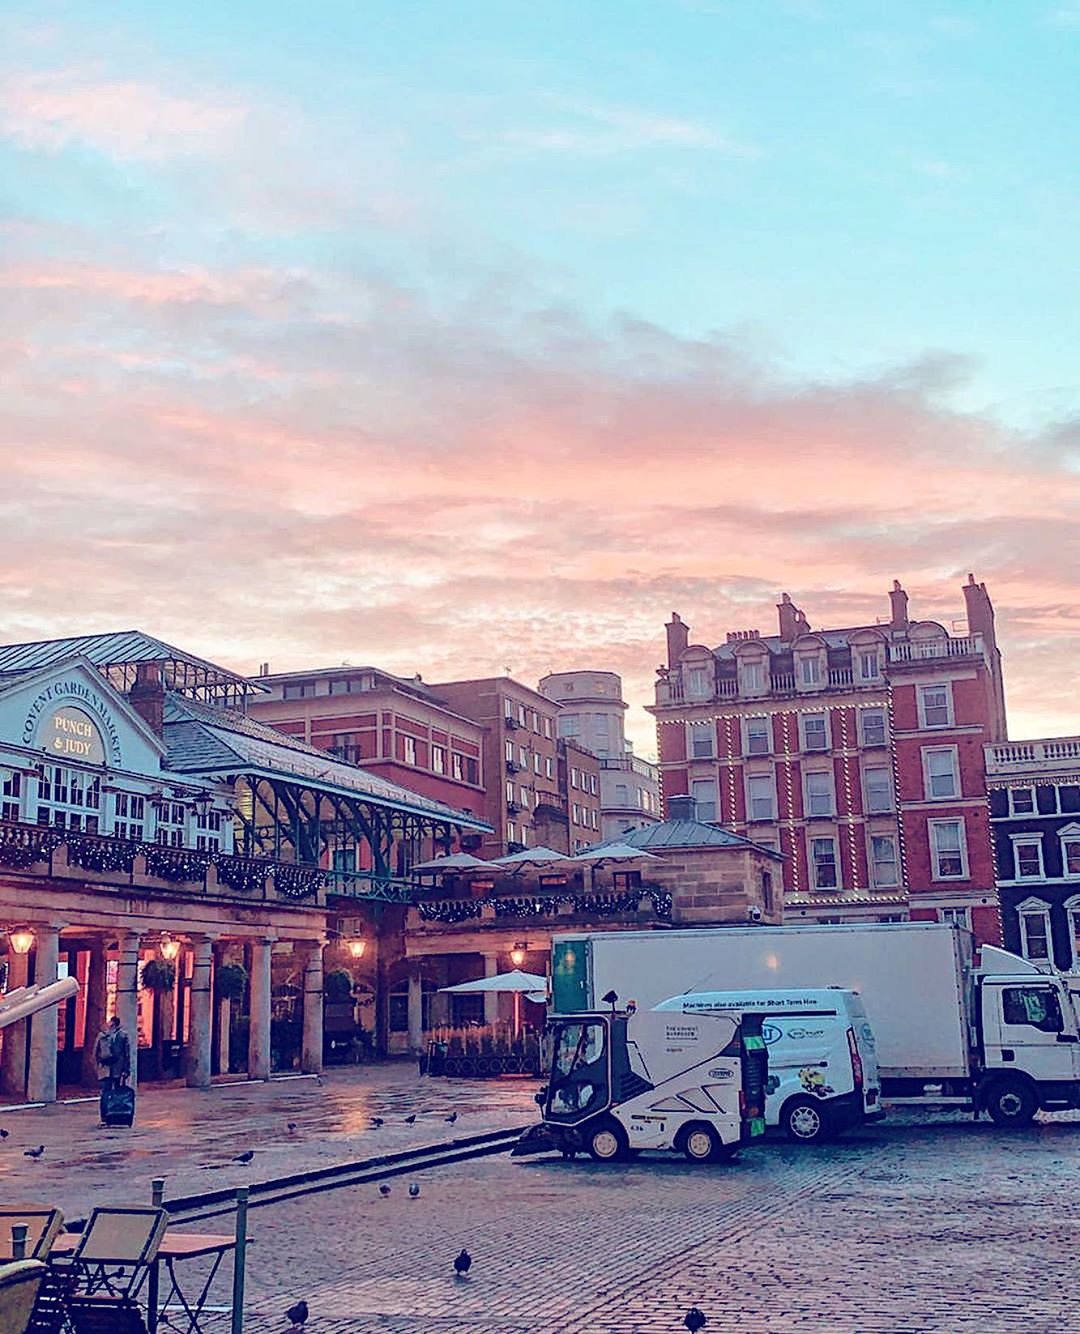 As lockdown measures begin to ease, we’re looking ahead to the places we can’t wait to visit again✨⁣
⁣
Each Wednesday a member of the @fox_comms team will share the place they’re most looking forward to returning to #AnyDayNow⁣
⁣
This week, @emmacostelloe_ looks forward to returning to Covent Garden: ⁣
⁣
‘Before moving to London and since living here, Covent Garden has always been one of my favourite spots in the city, which is why I couldn’t have been happier when Fox HQ moved here last December – with so much character, an abundance of shops & restaurants and bustling atmosphere I can’t wait to return soon!🛍’ ⁣
⁣
#AnyDayNow #CoventGarden #Lifestyle #FoxCommsLifestyle #FoxCommsTravel ⁣